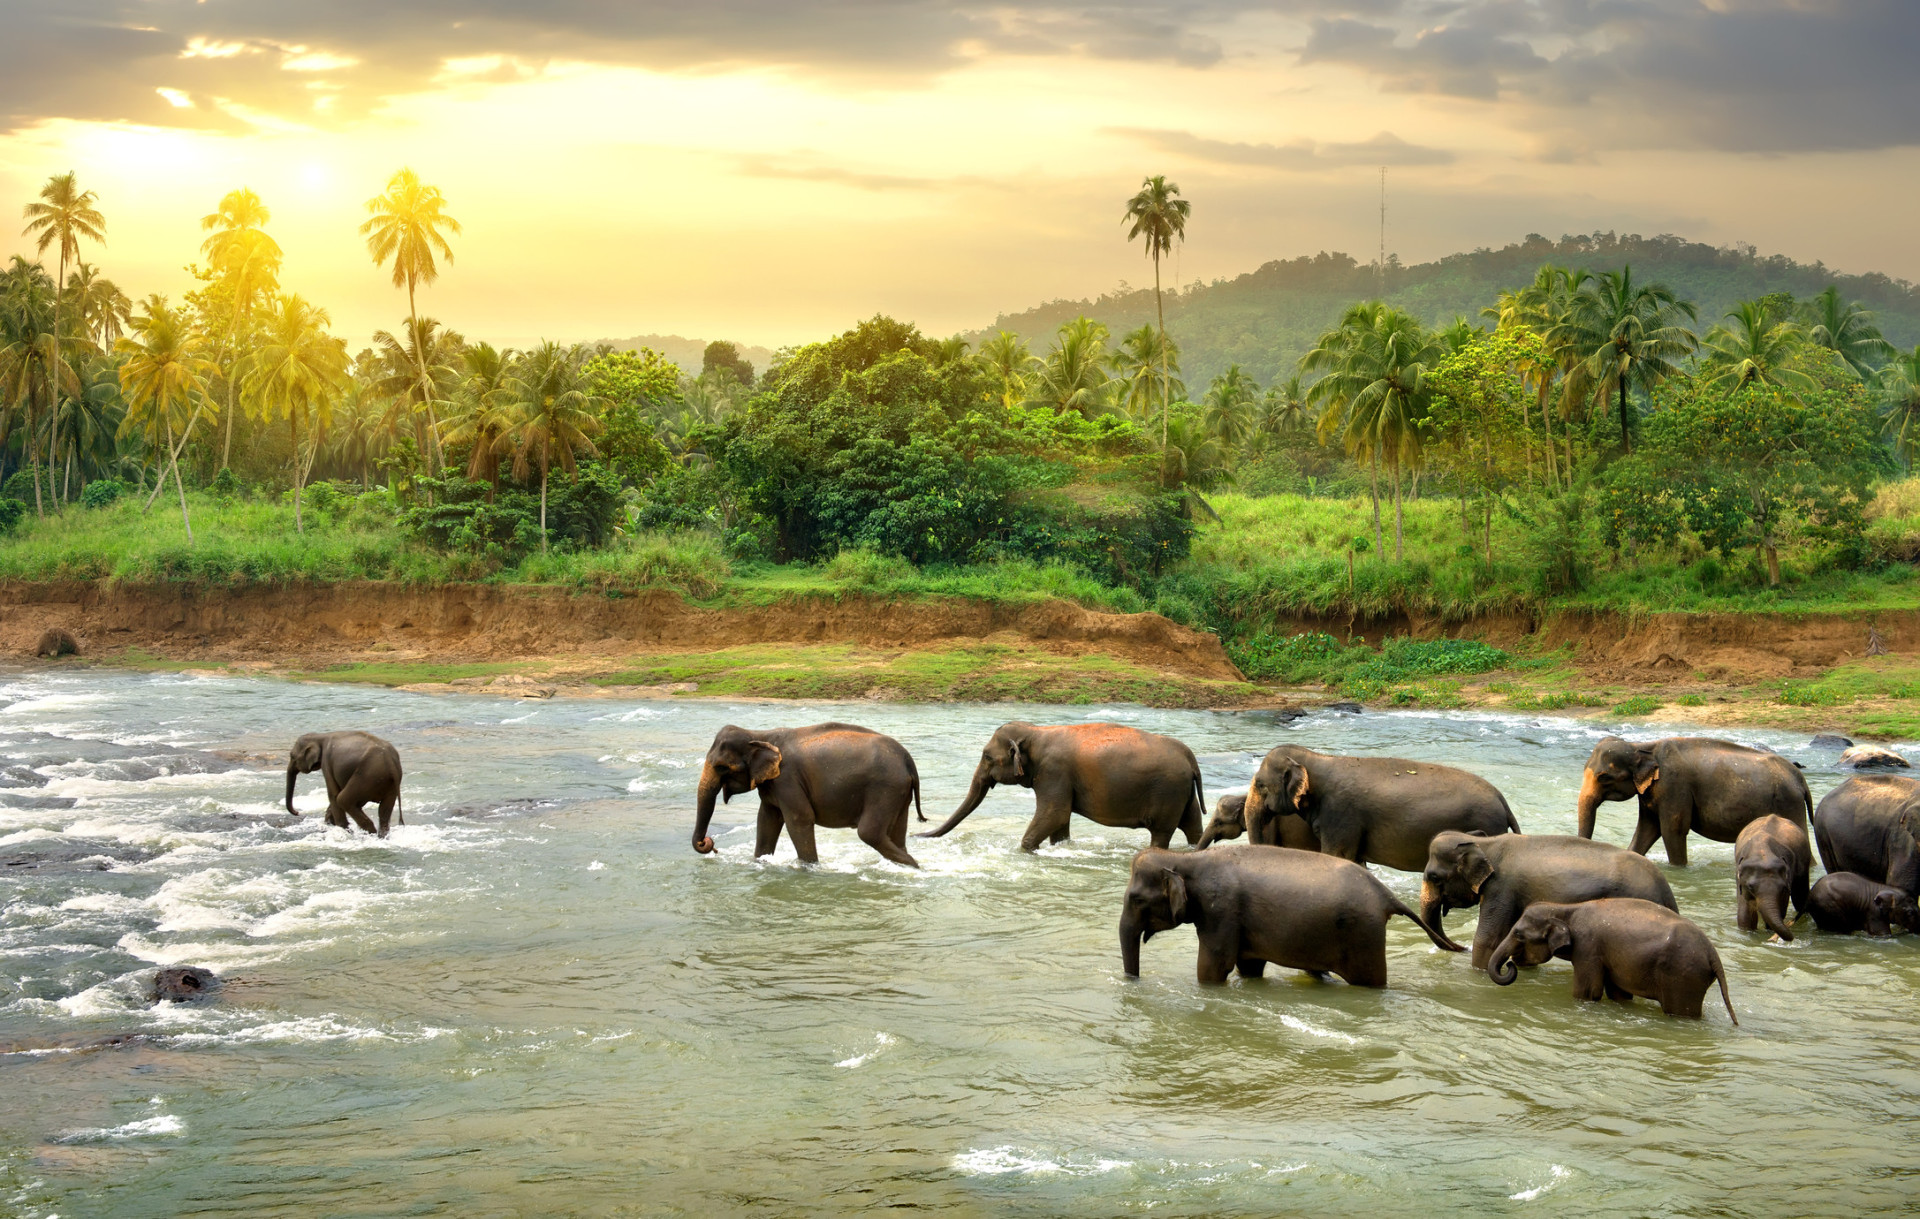 Sri Lanka is a wonderful option for people who want to combine culture, wildlife and nature, and paradisiac beaches in one single trip.<p>You may also like:<a href="https://www.starsinsider.com/n/451191?utm_source=msn.com&utm_medium=display&utm_campaign=referral_description&utm_content=284295v5en-nz"> The most covered songs ever</a></p>